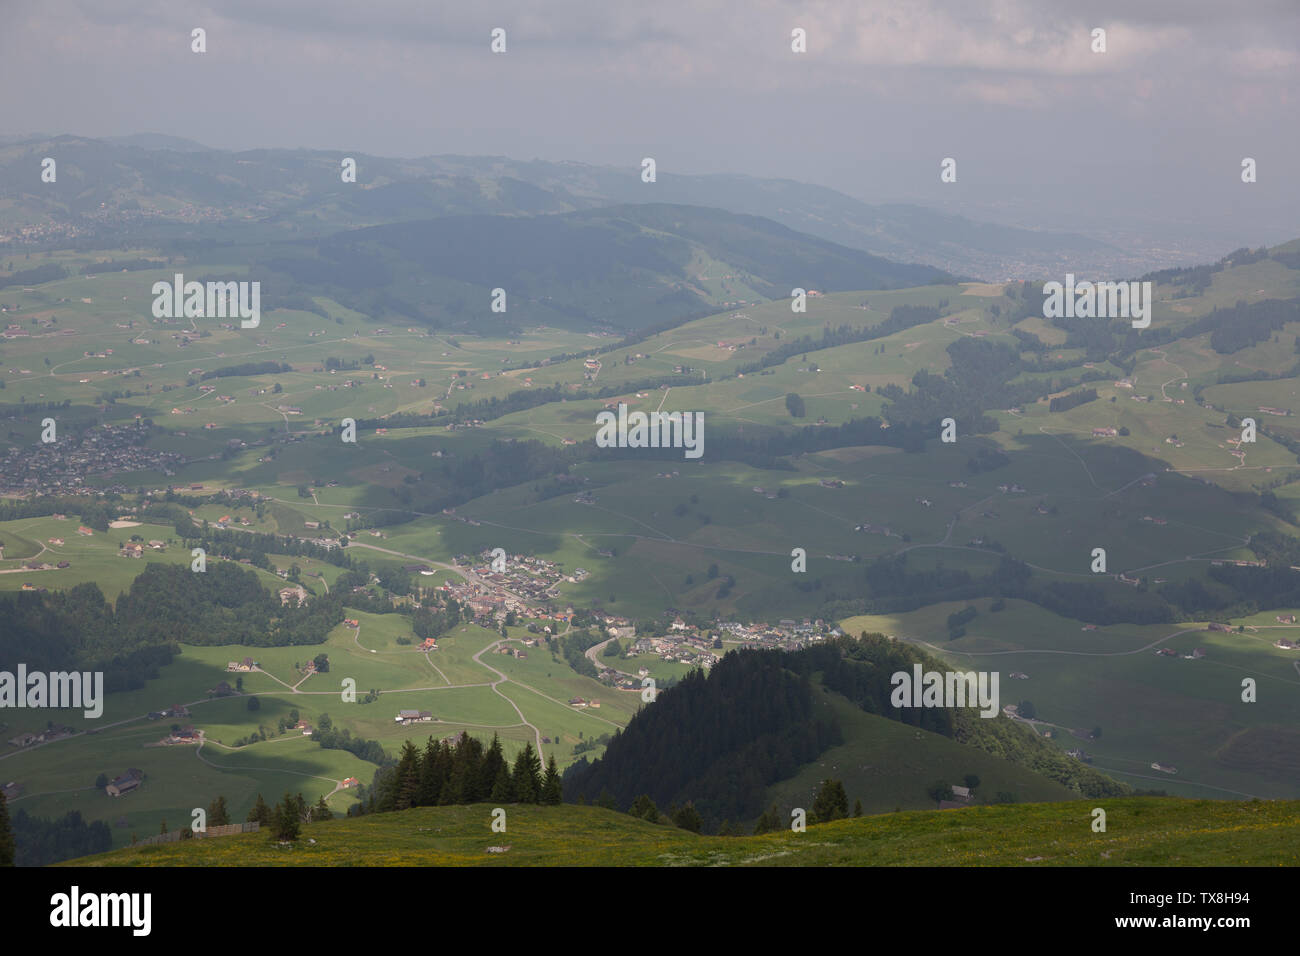 Looking out across the beautiful Appenzell Alps from Ebenalp, Switzerland on a cloudy Alpine day. Stock Photo